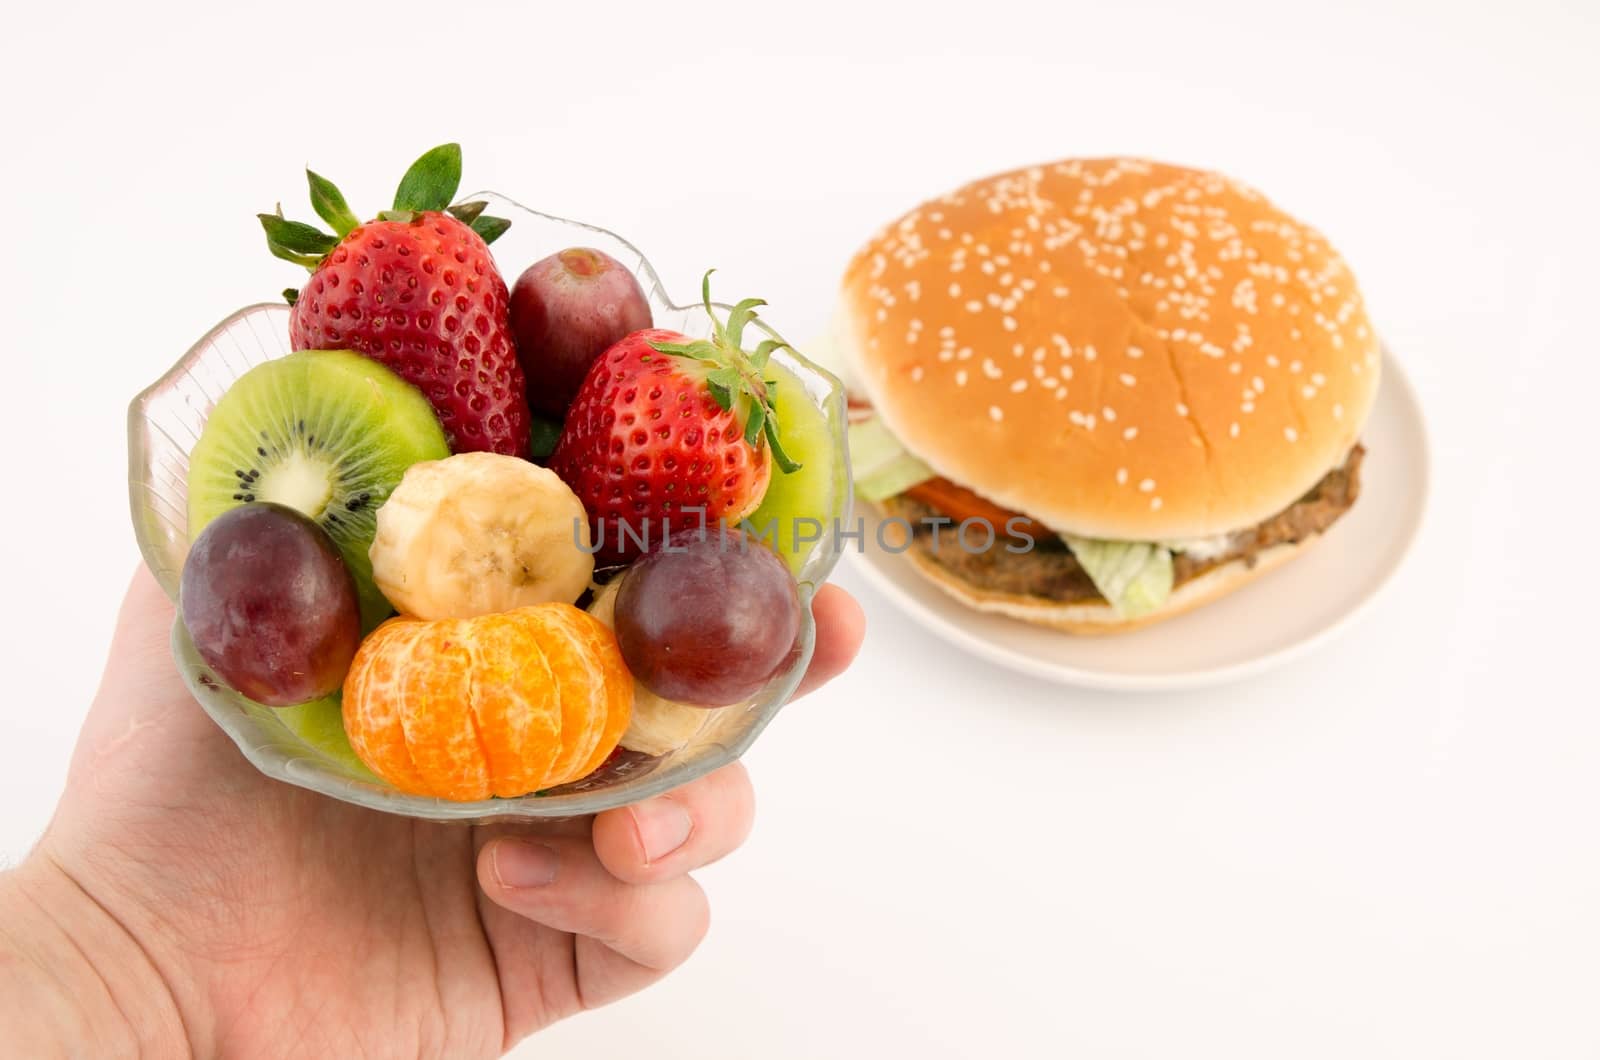 Choosing between hamburger and fruits. Food on white background by simpson33